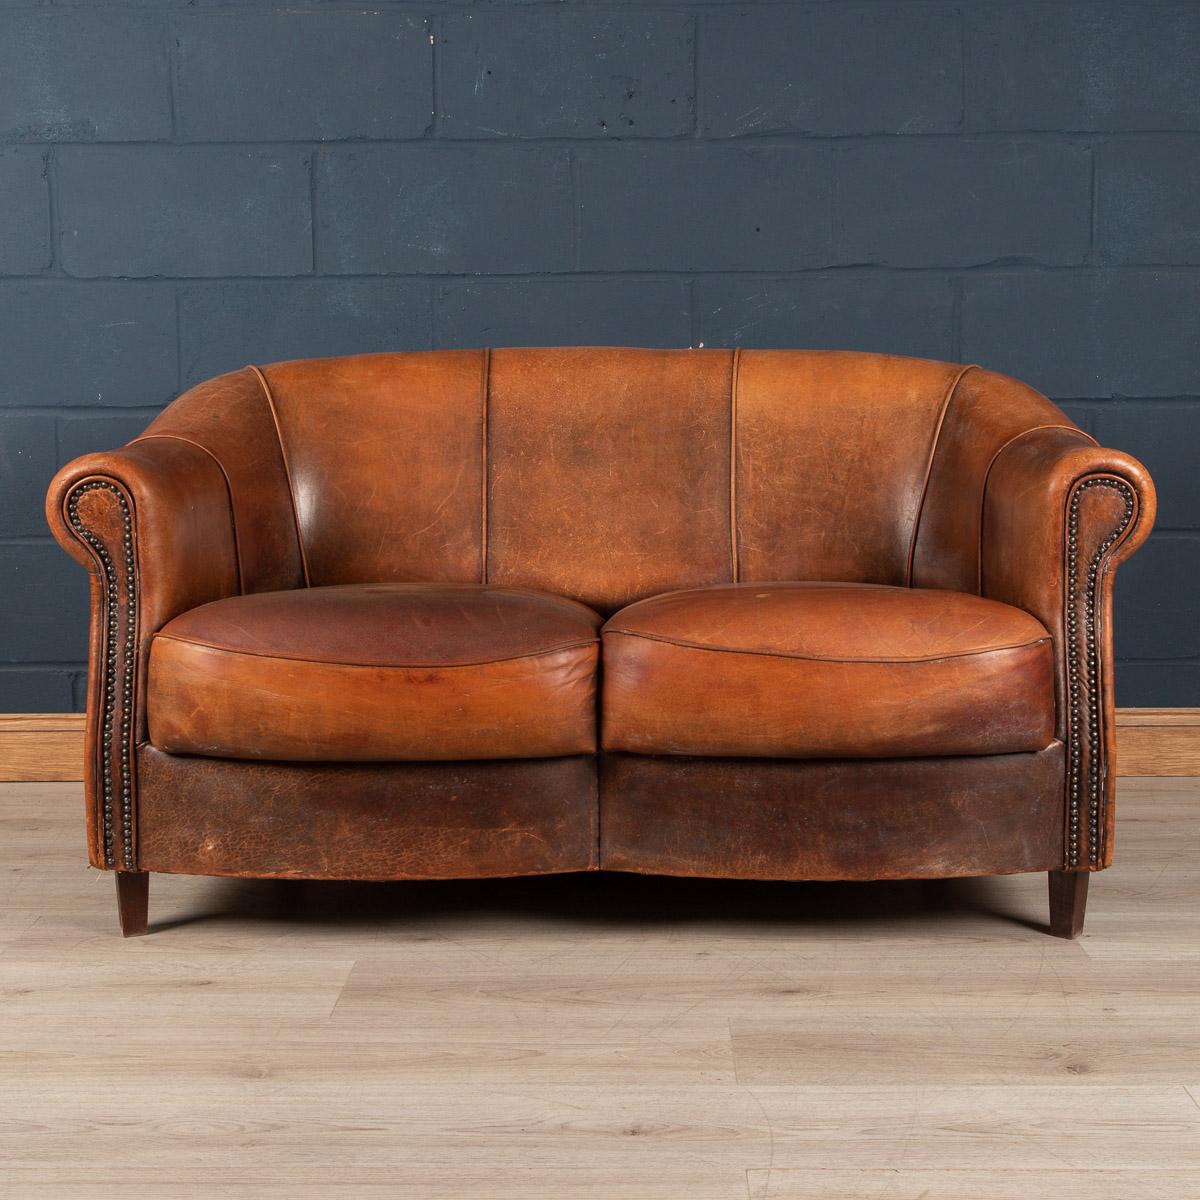 A wonderful leather two seater sofa in rich tan sheepskin leather, manufactured in Holland and of the finest quality with great patina. Fantastic look for any interior, both modern and traditional.

Condition
In good condition - good vintage